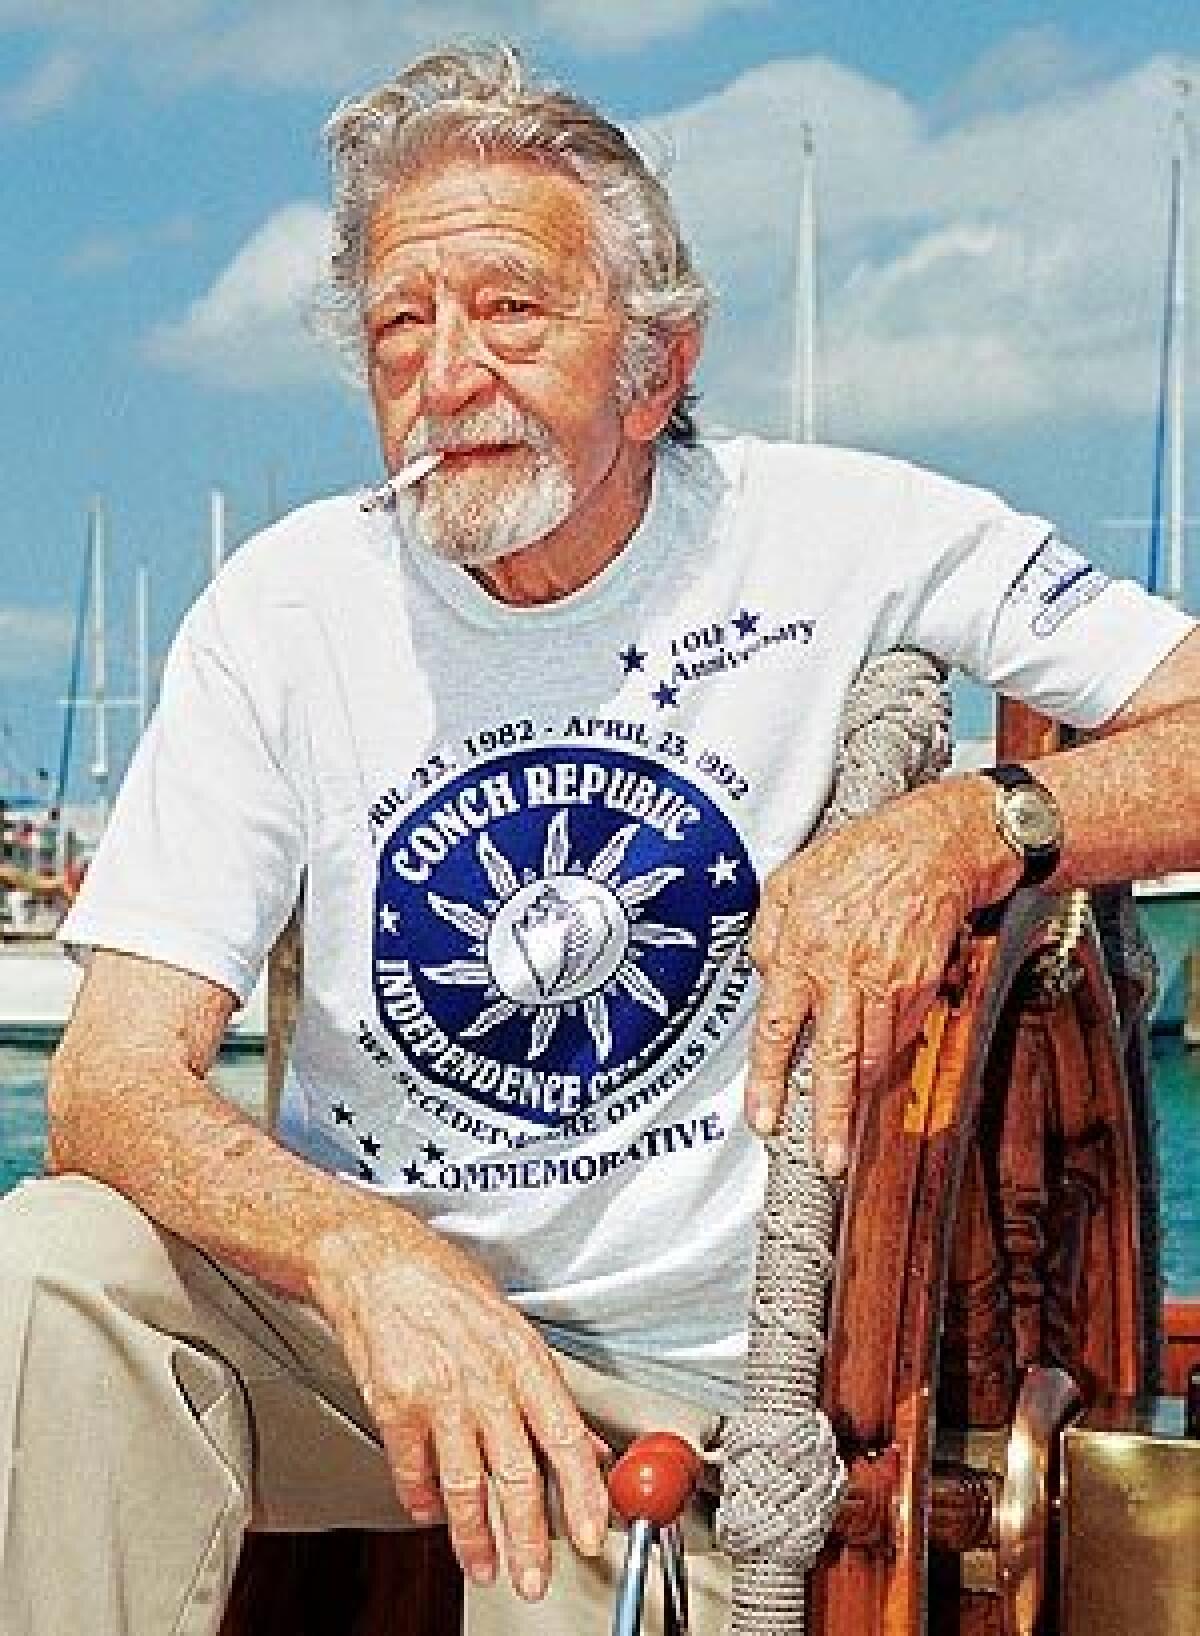 Anthony Tarracino arrived in Key West, Fla., in 1948. He spent more than three decades as a charter boat captain and ran Capt. Tonys saloon. In 1989, he ran for mayor and won by 32 votes.